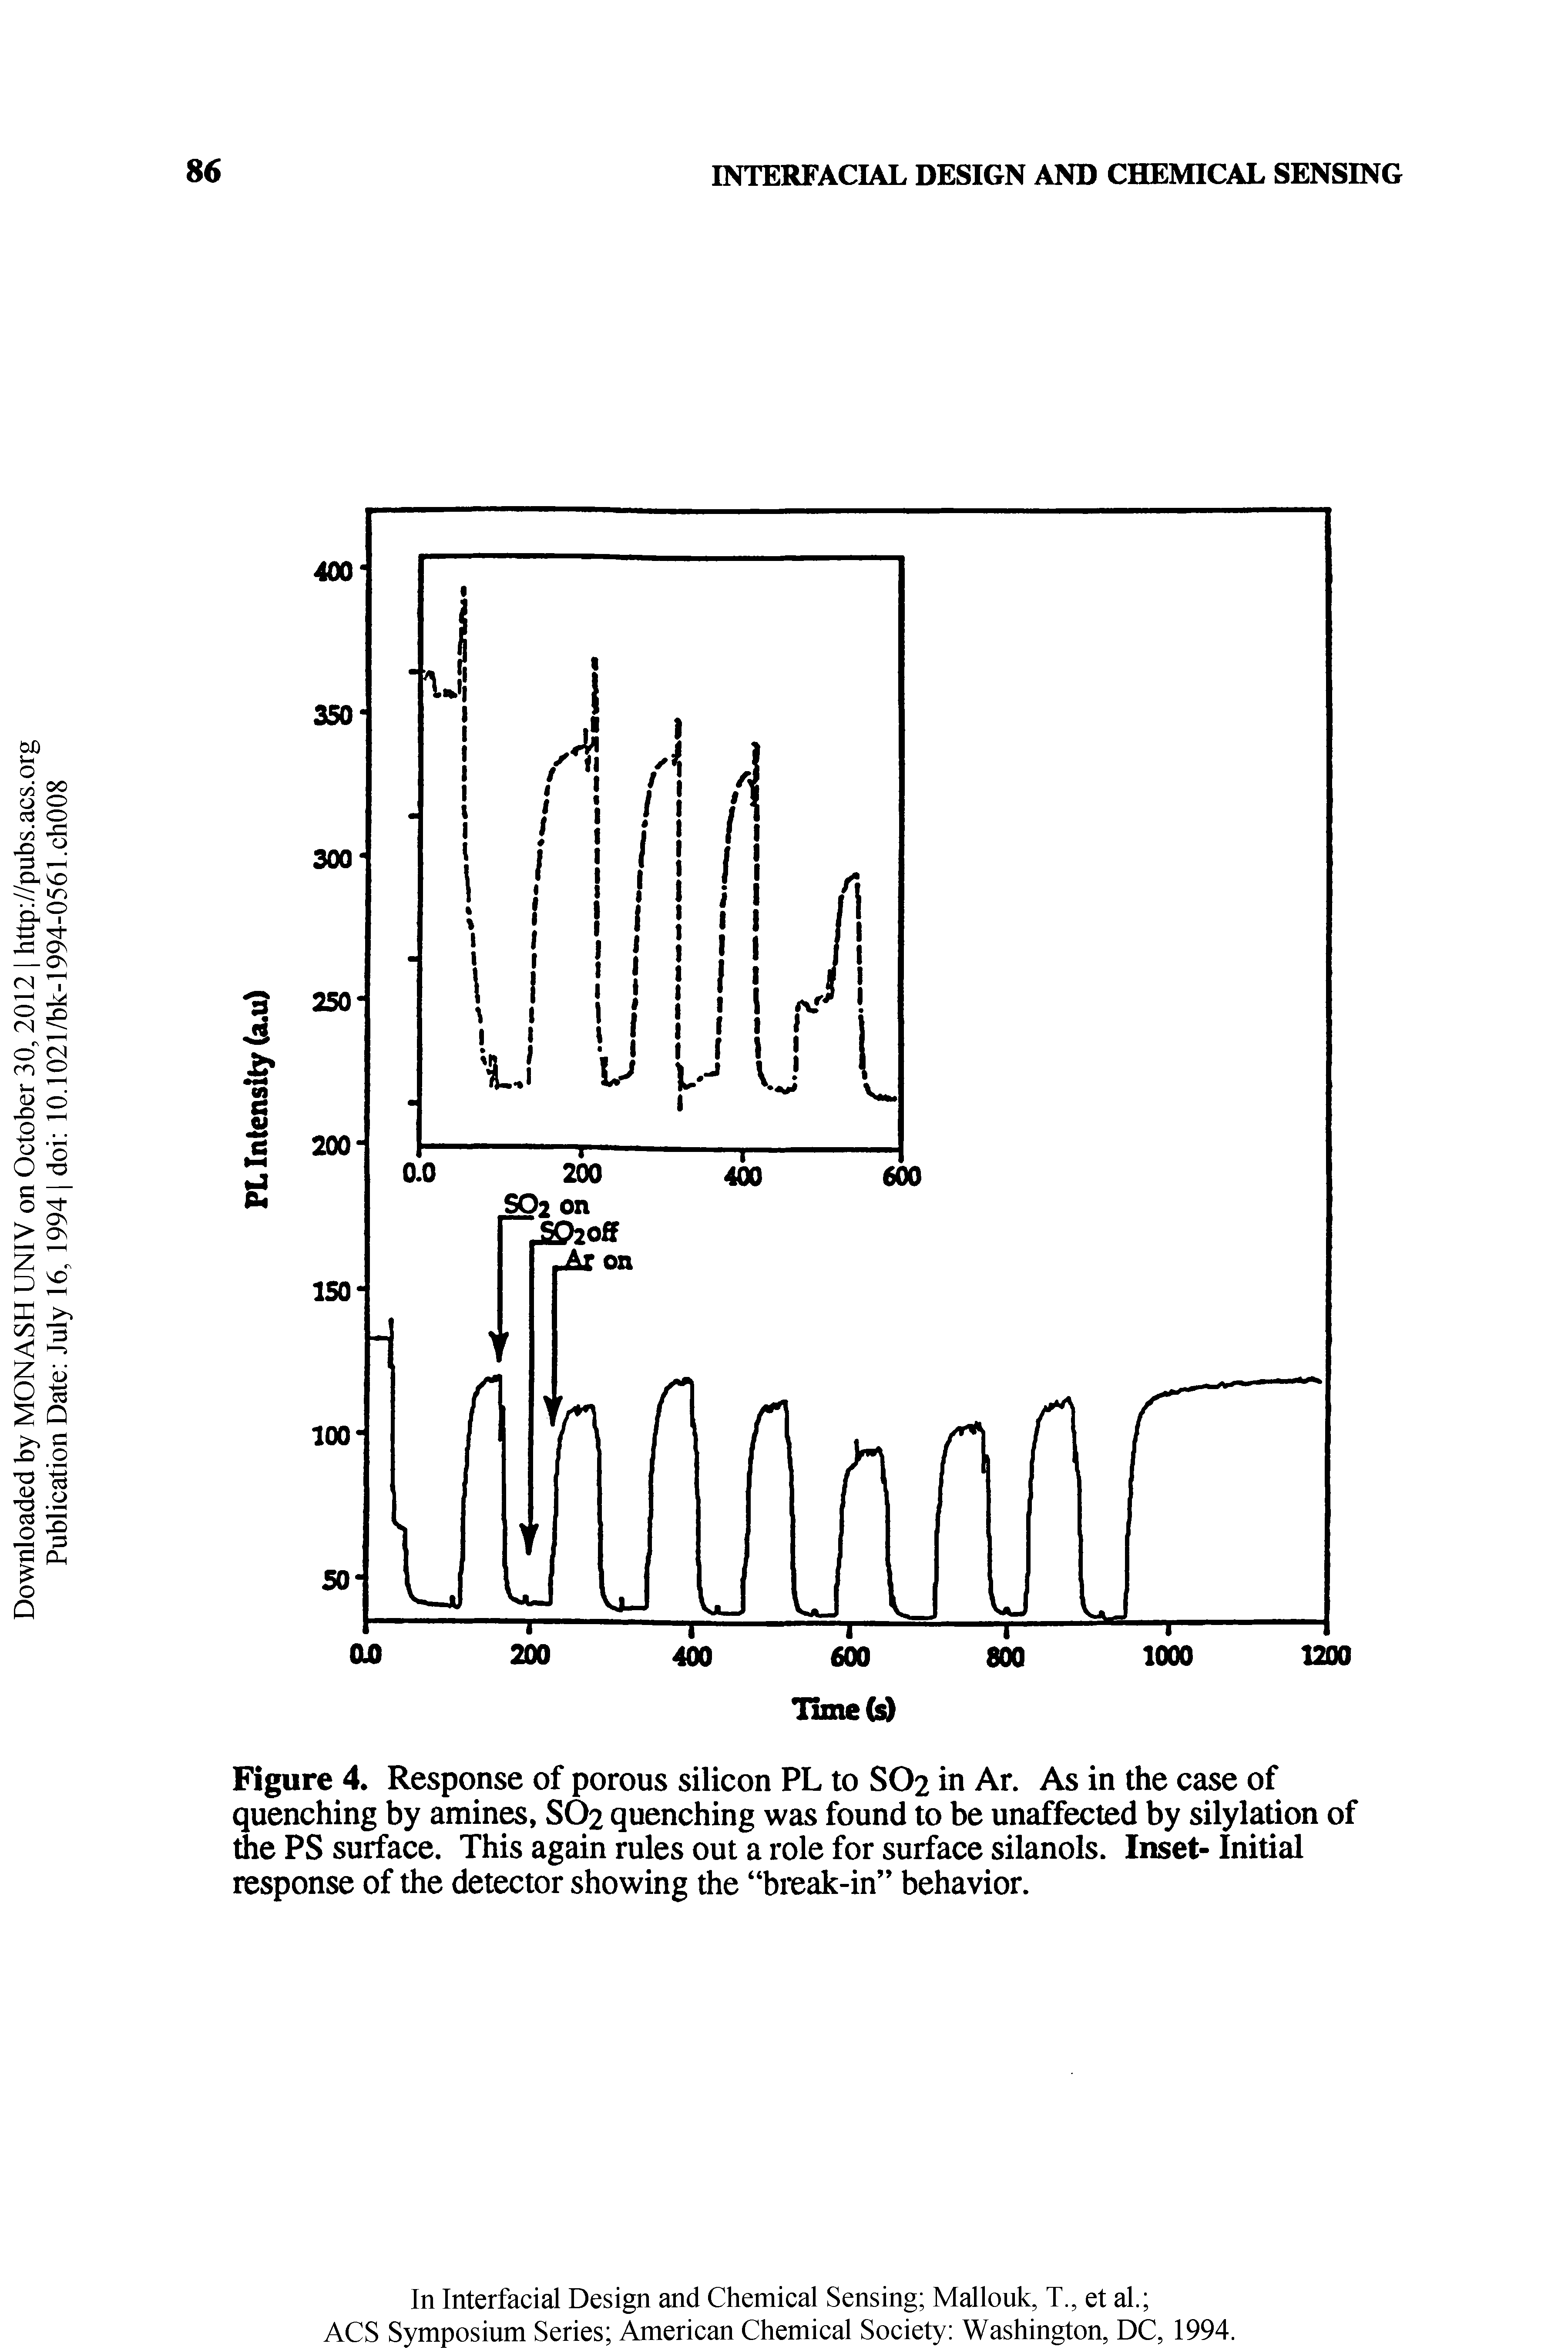 Figure 4. Response of porous silicon PL to SO2 in Ar. As in the case of quenching by amines, SO2 quenching was found to be unaffected by silylation of the PS surface. This again rules out a role for surface silanols. Inset- Initial response of the detector showing the bi eak-in behavior.